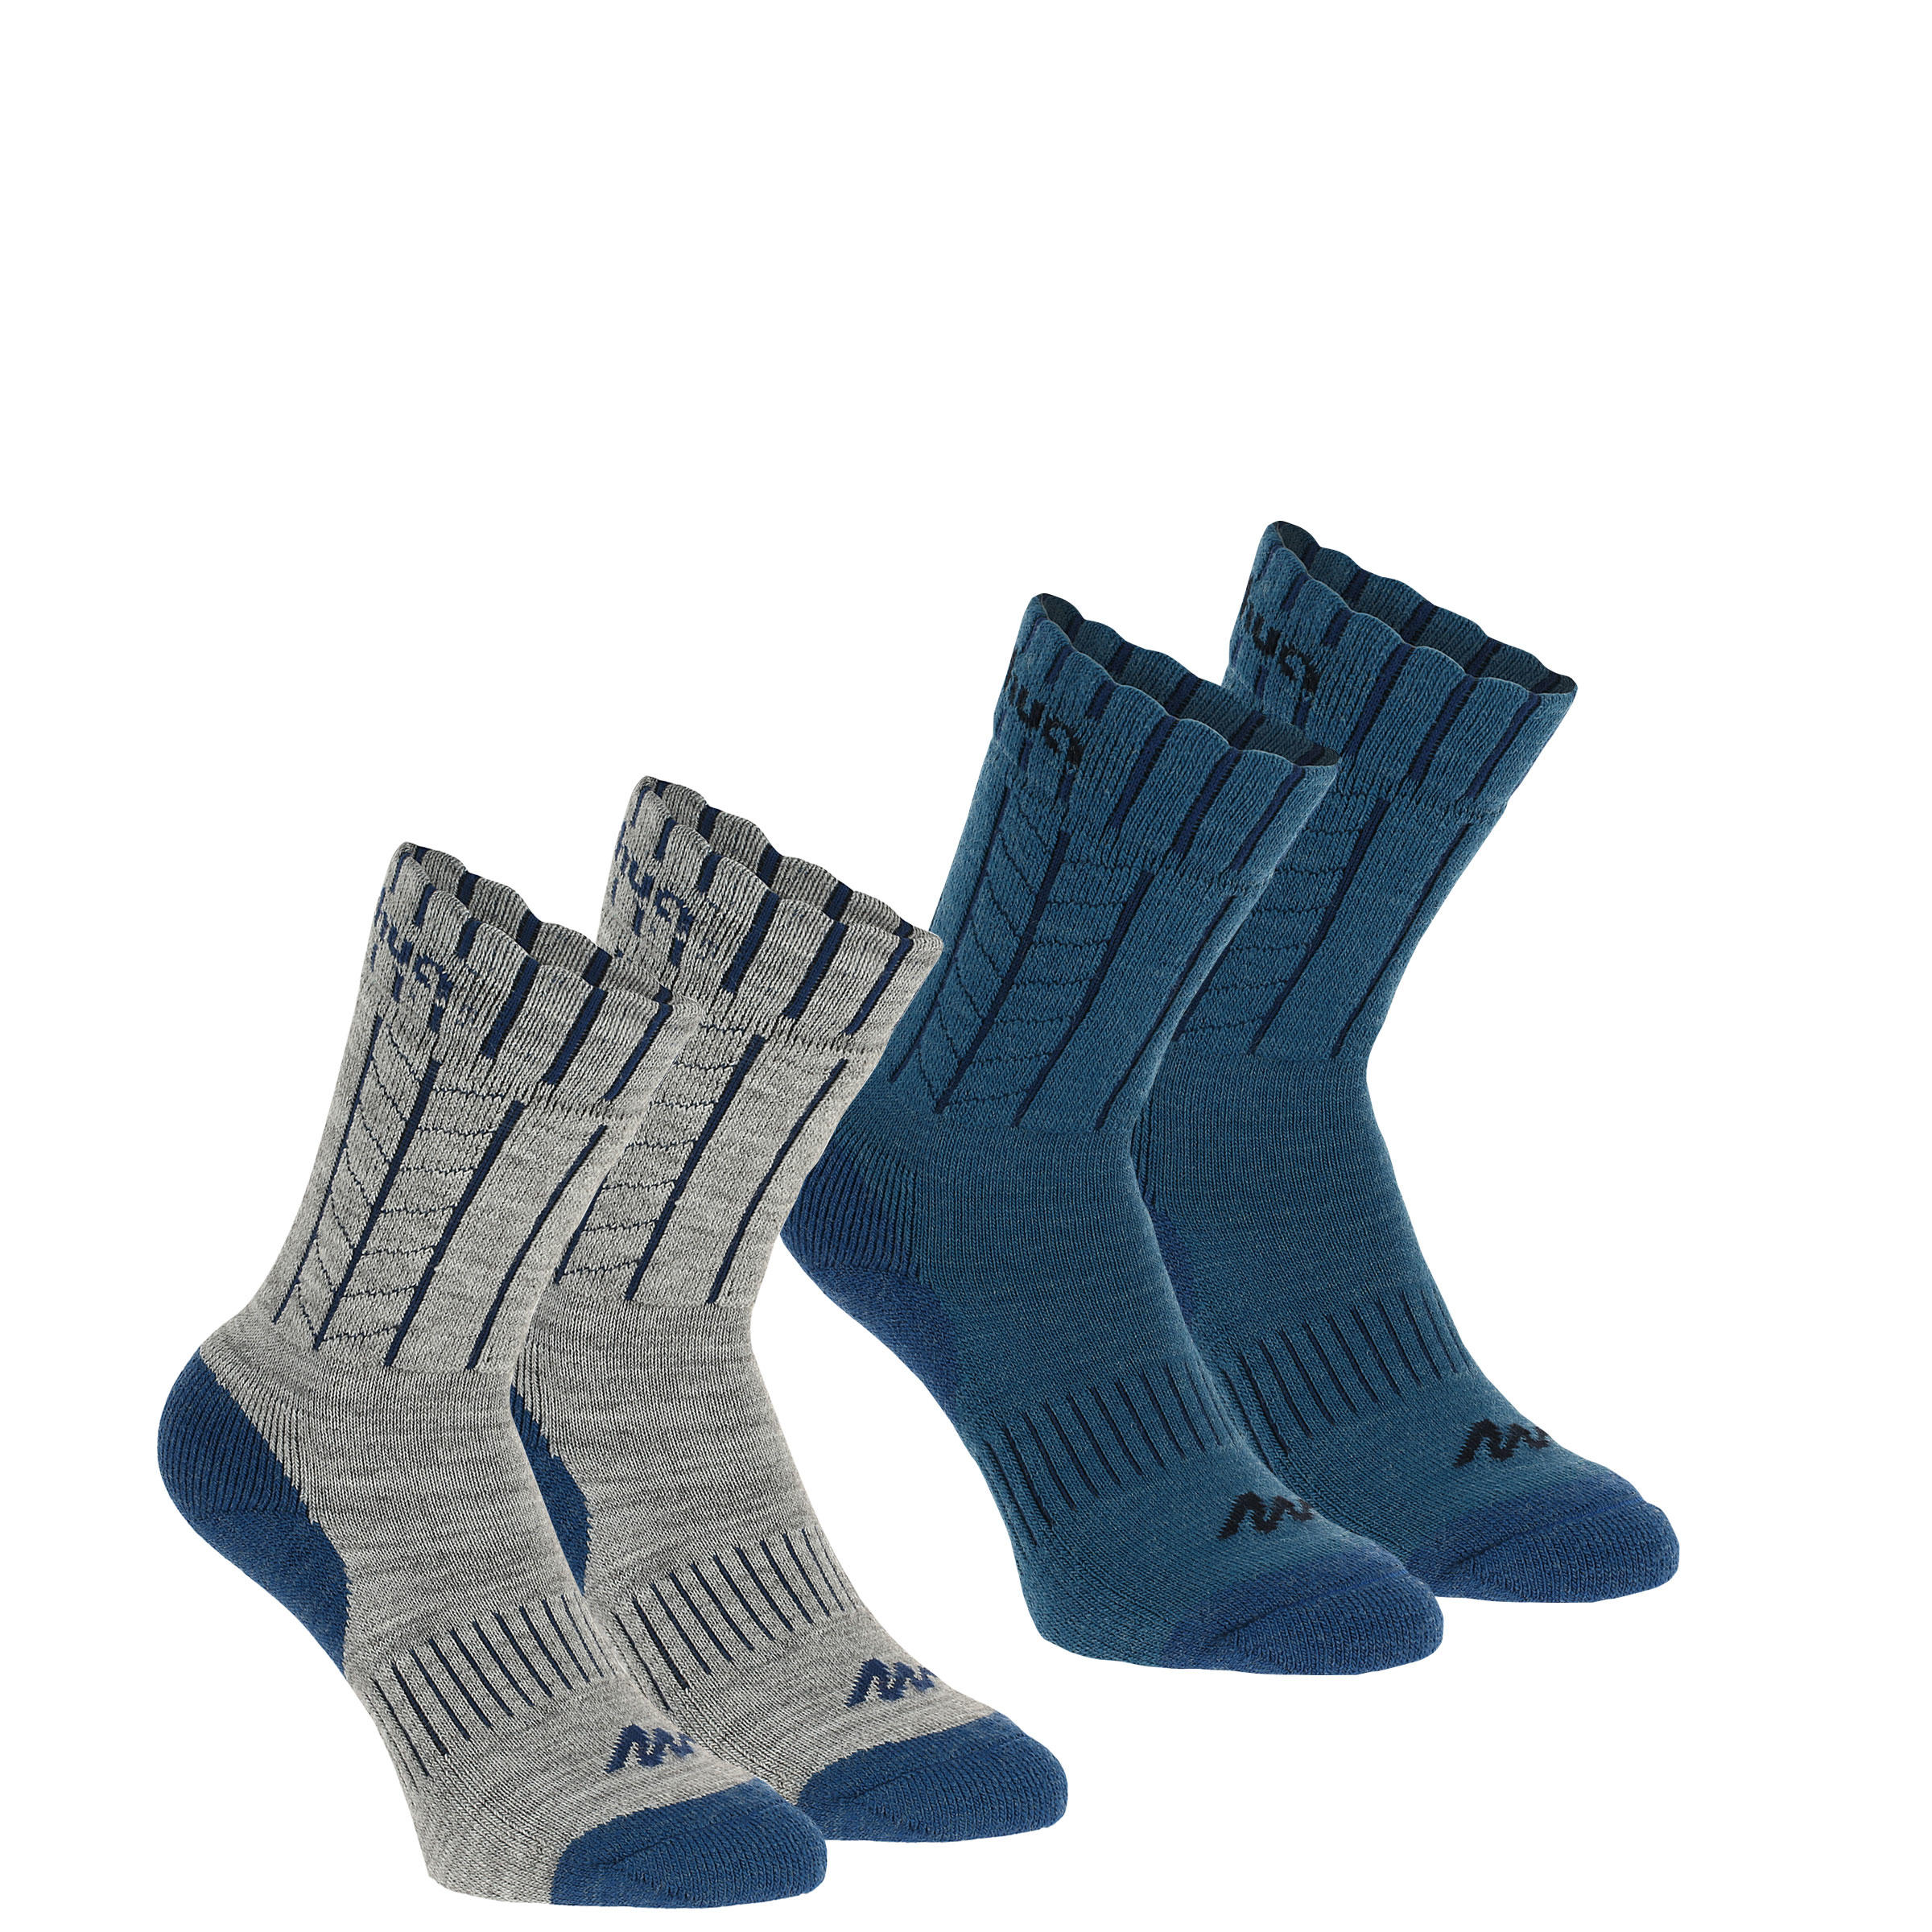 QUECHUA Arpenaz Warm Hiking Socks - Grey/Blue and Blue, 2 Pairs